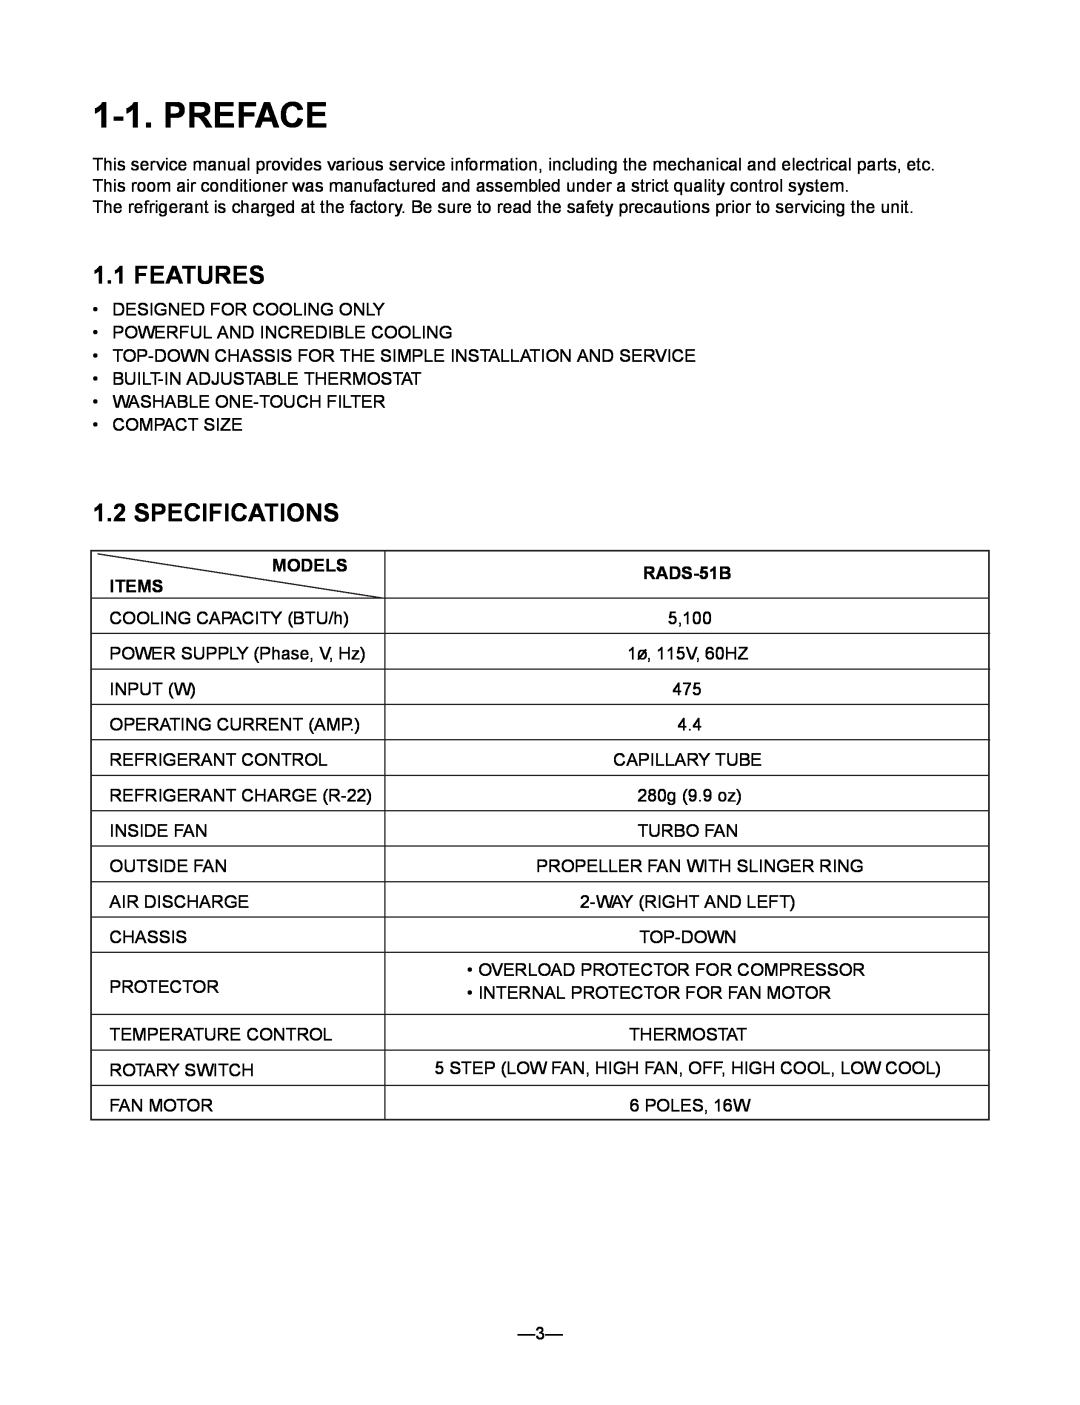 Heat Controller RADS-51B manual Preface, Features, Specifications 